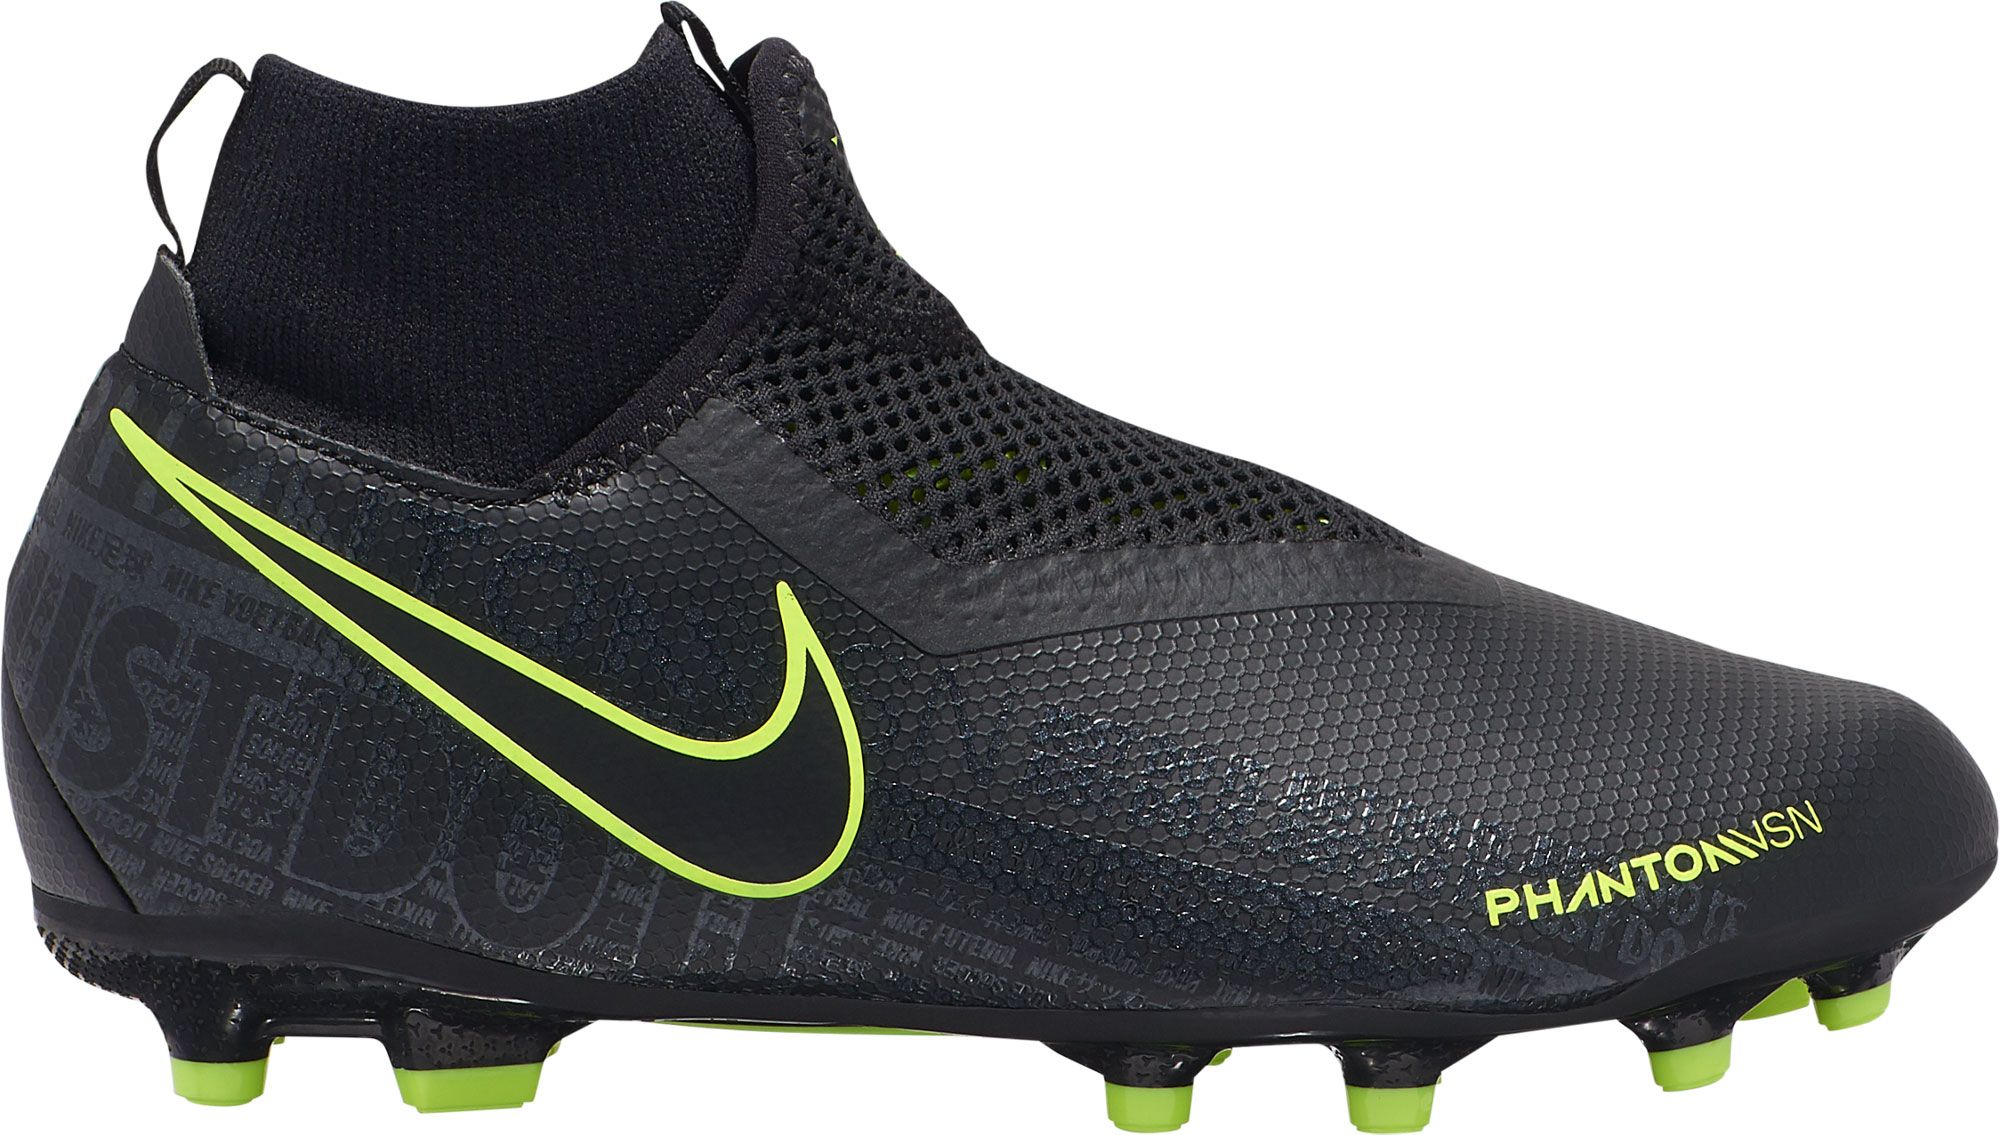 green and black nike soccer cleats